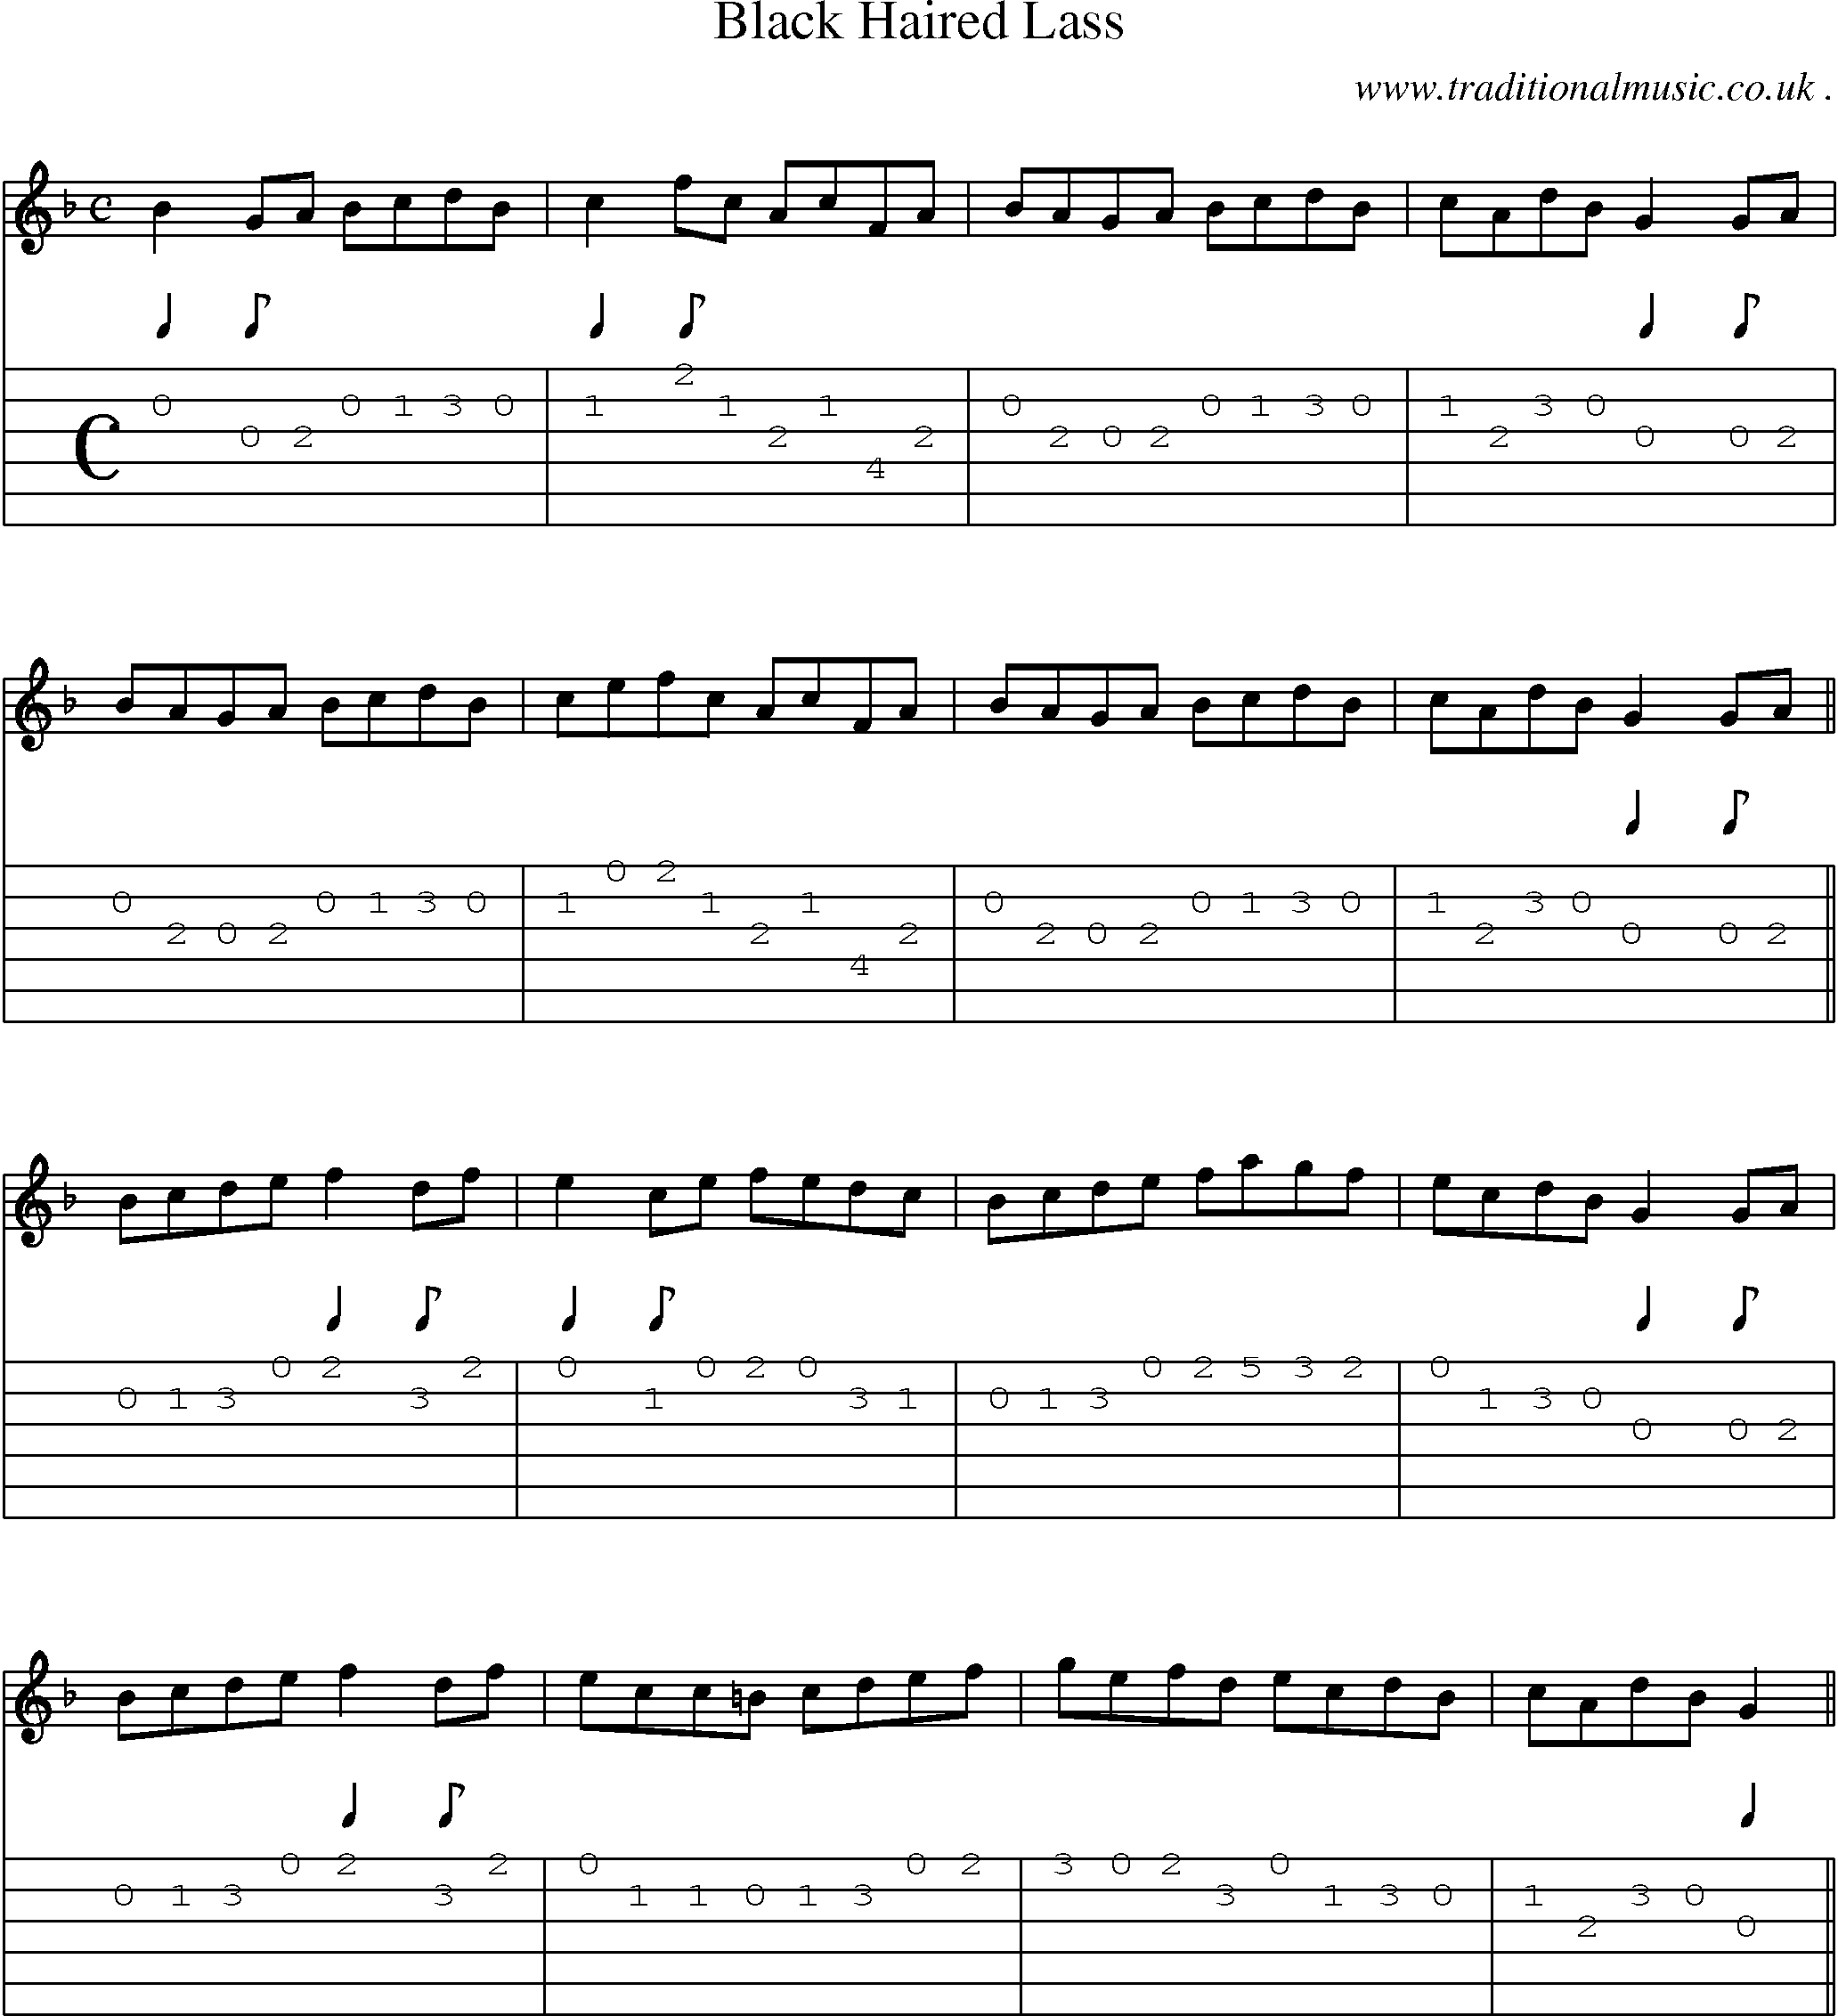 Sheet-Music and Guitar Tabs for Black Haired Lass